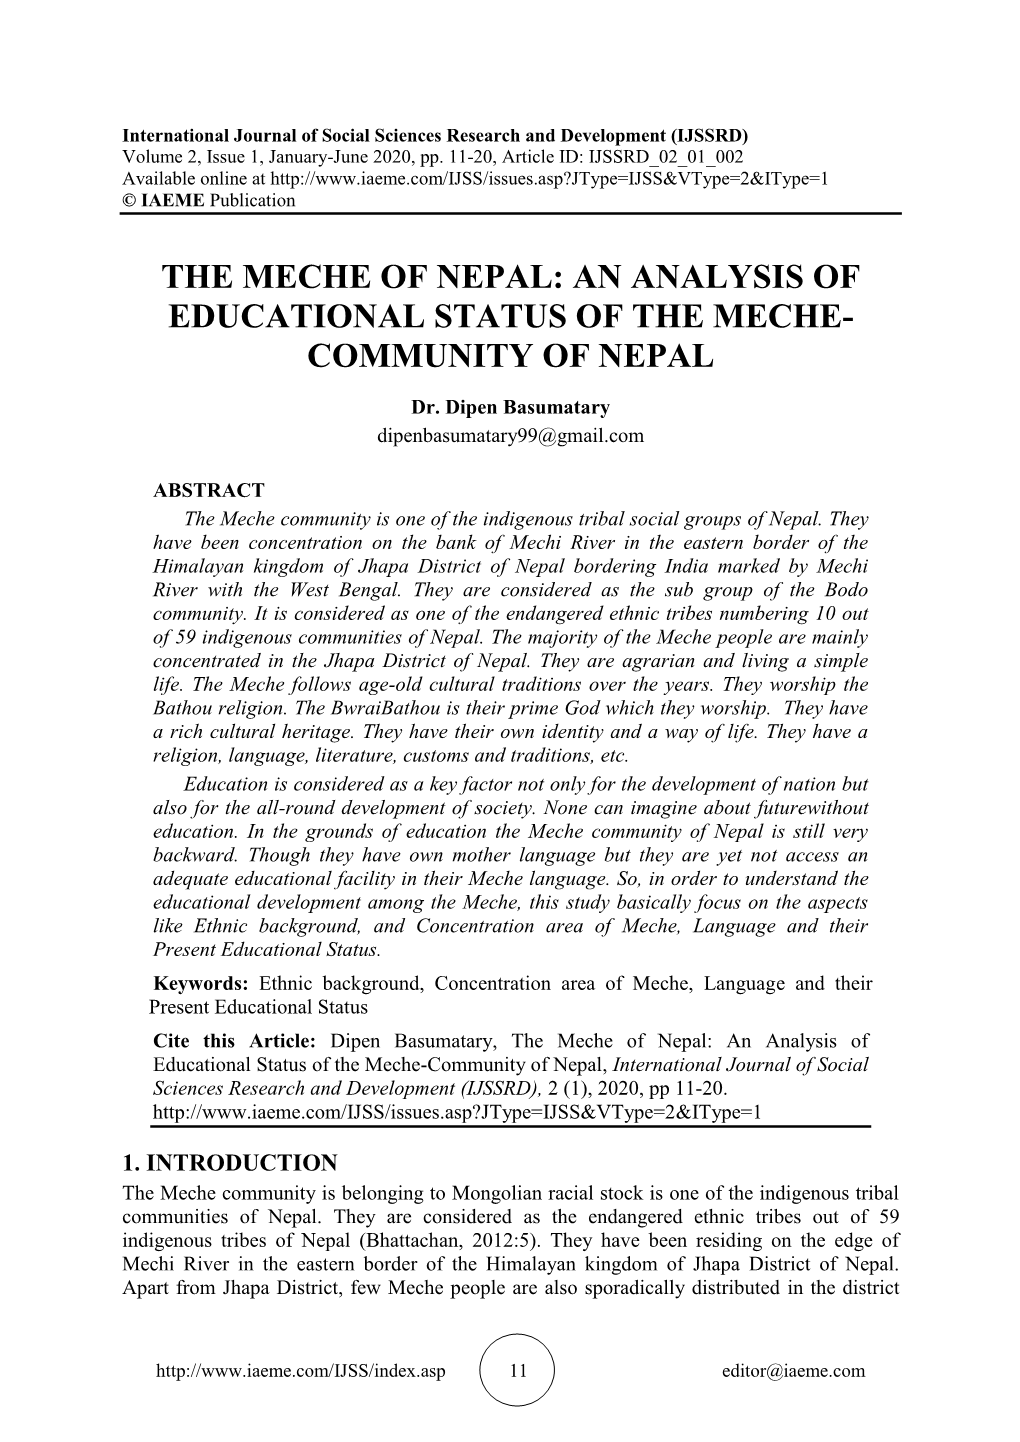 The Meche of Nepal: an Analysis of Educational Status of the Meche- Community of Nepal